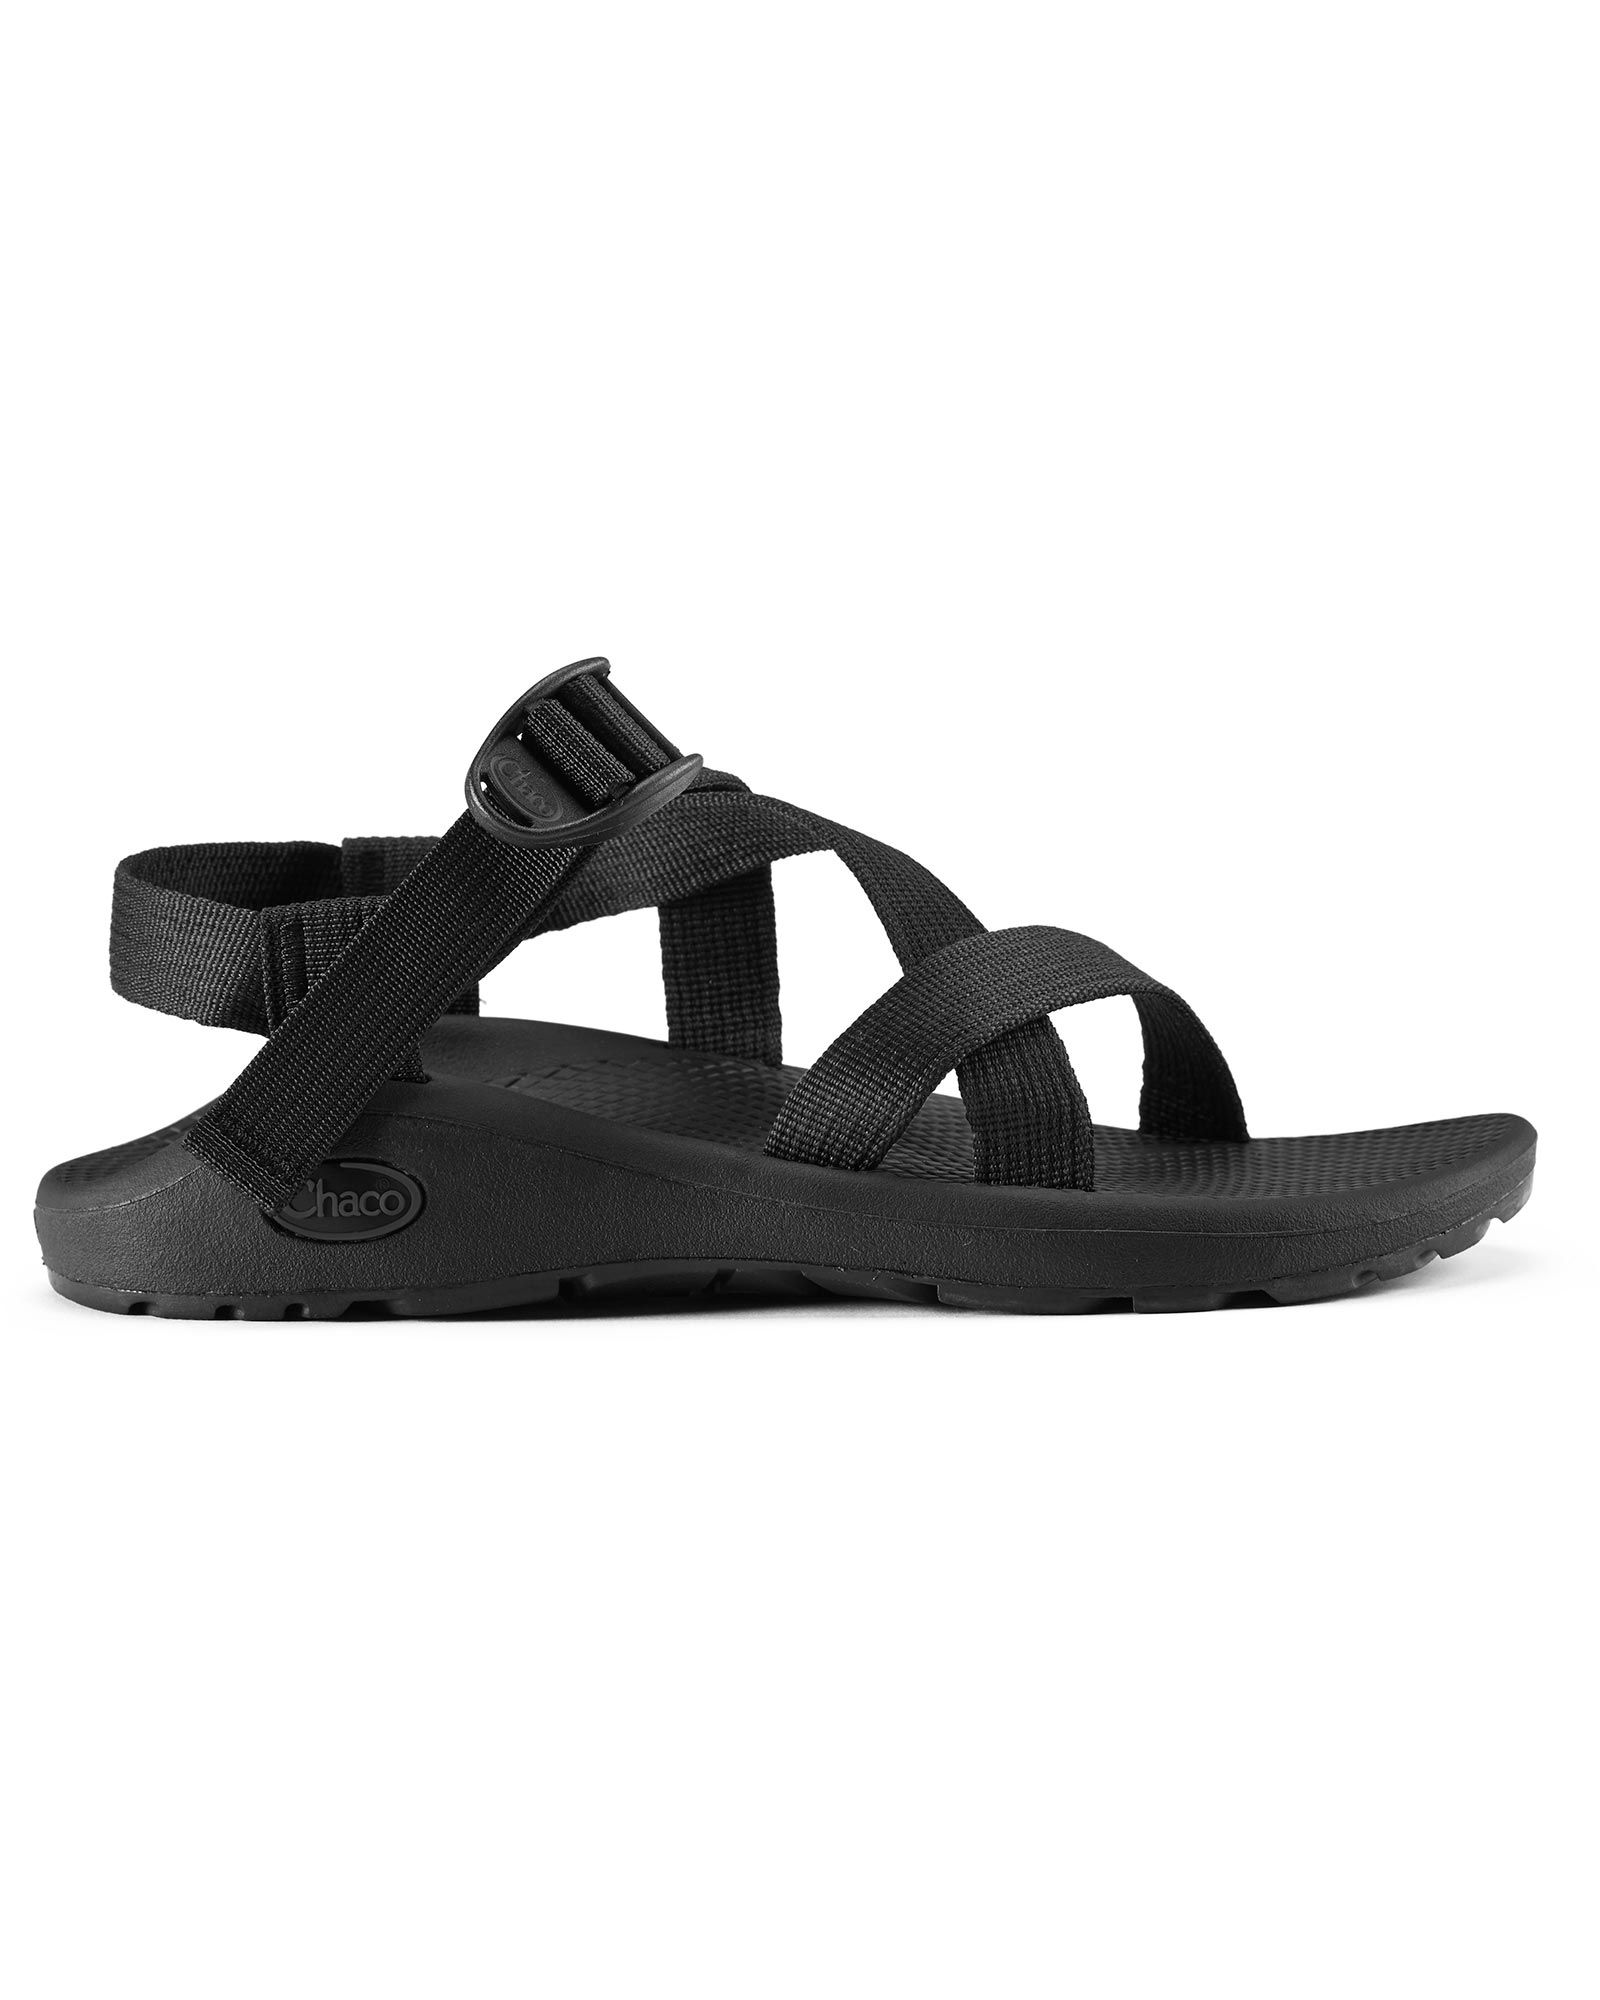 Product image of Chaco Women's Z Cloud Sandals